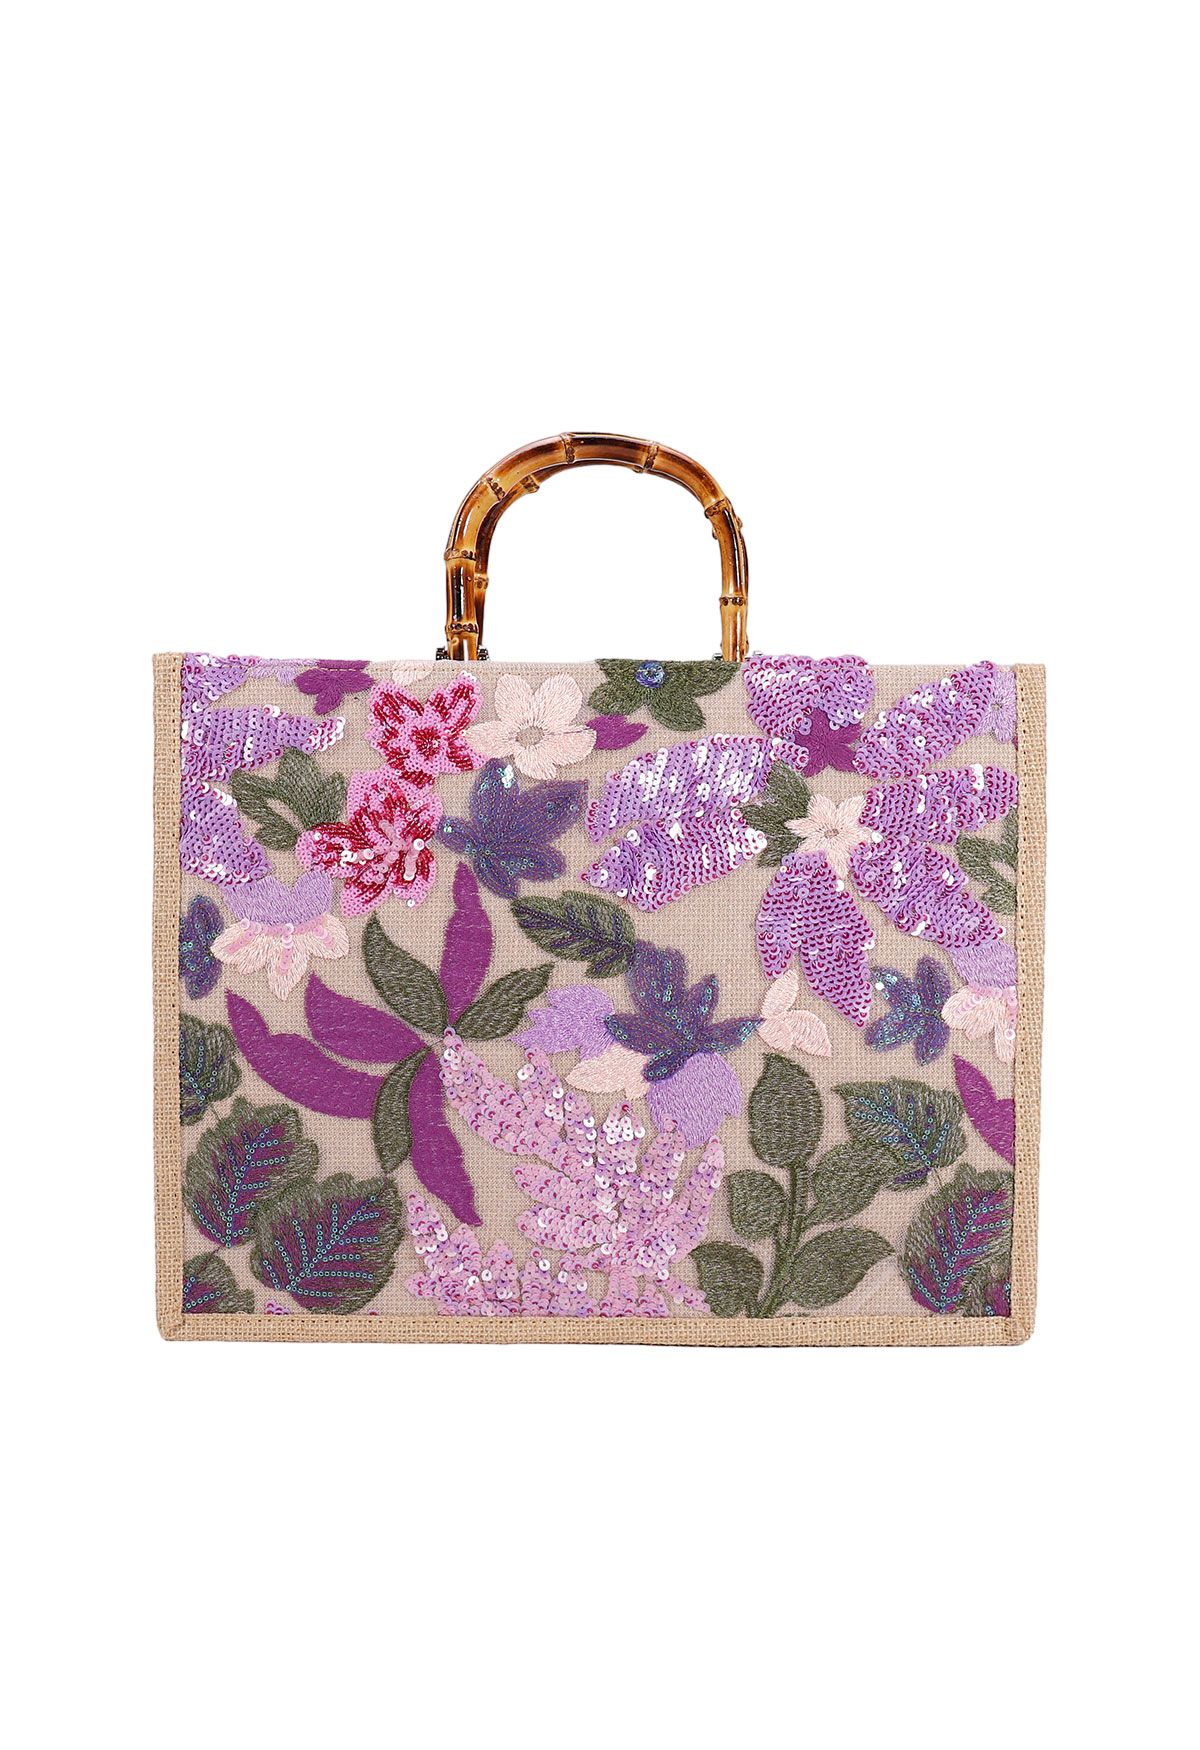 Sequin Floral Embroidered Bamboo Handle Tote Bag in Violet